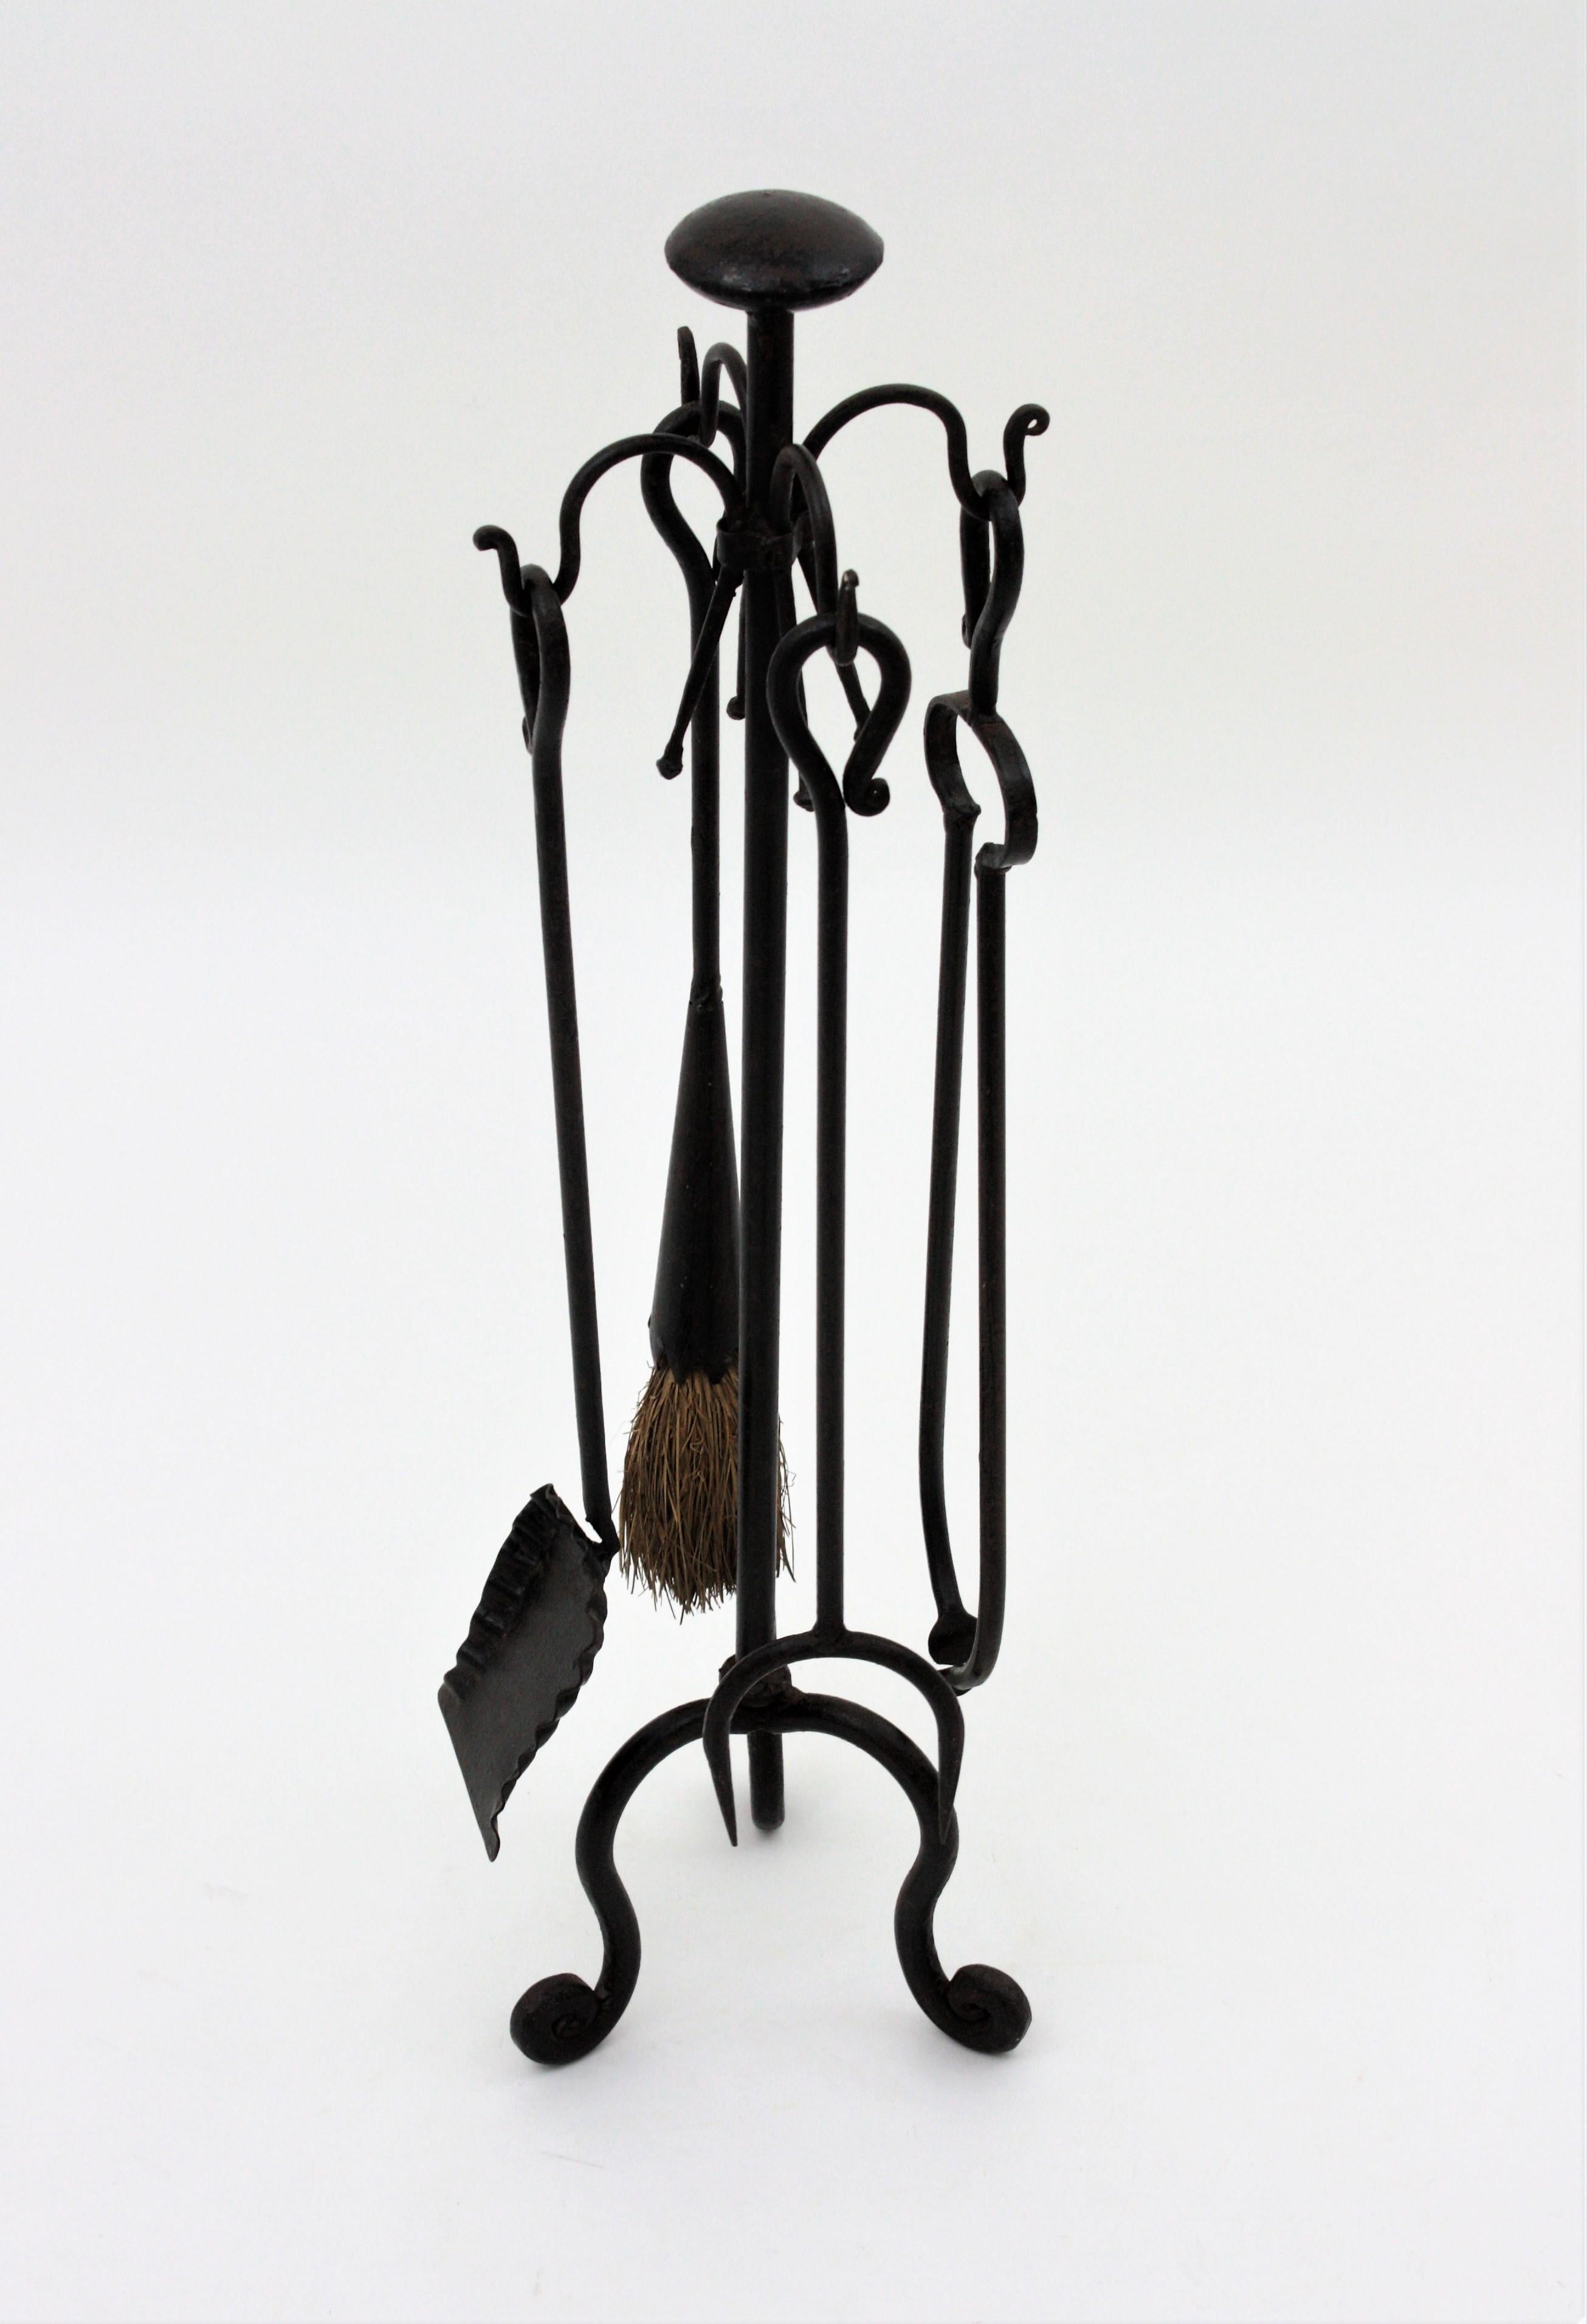 Beautiful Gothic style hand forged antique fireplace tool set on stand. Spain, 1940s
The set includes four hand forged iron tools : a shovel, a log poker, broom, and tongs. The rack stands up on a tripod base with scroll details, hook endings to